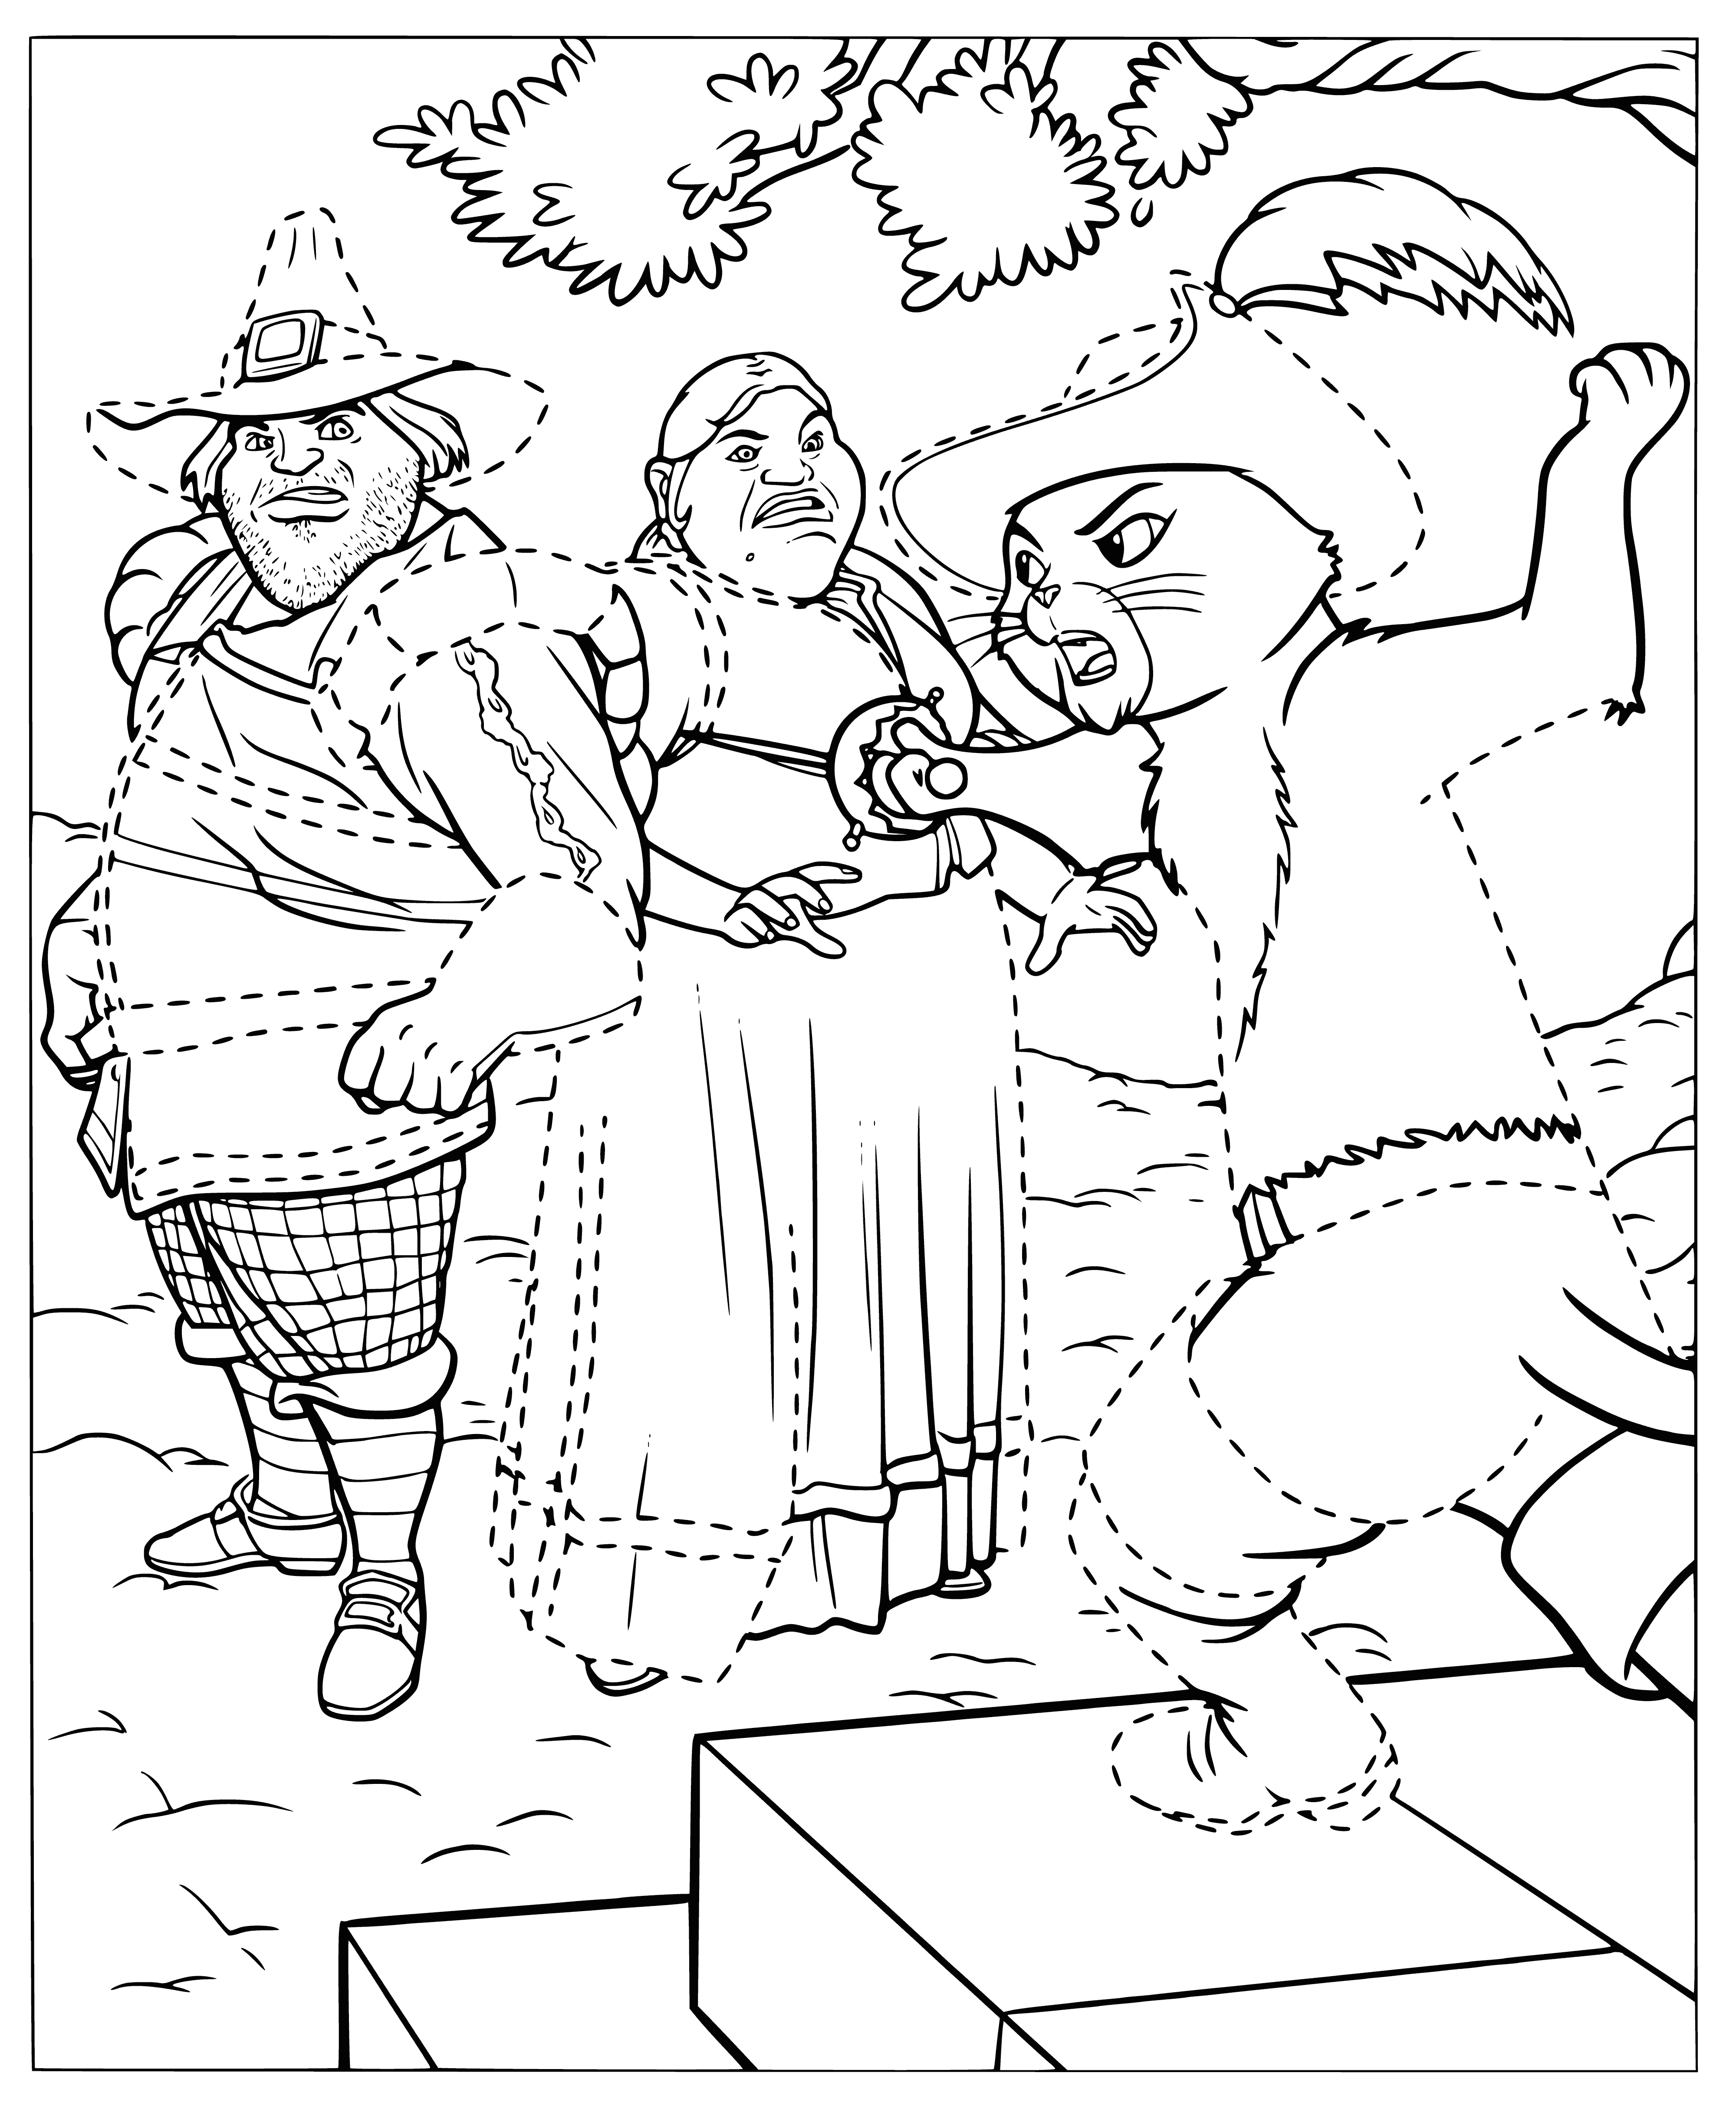 Thunderstorm of bandits coloring page